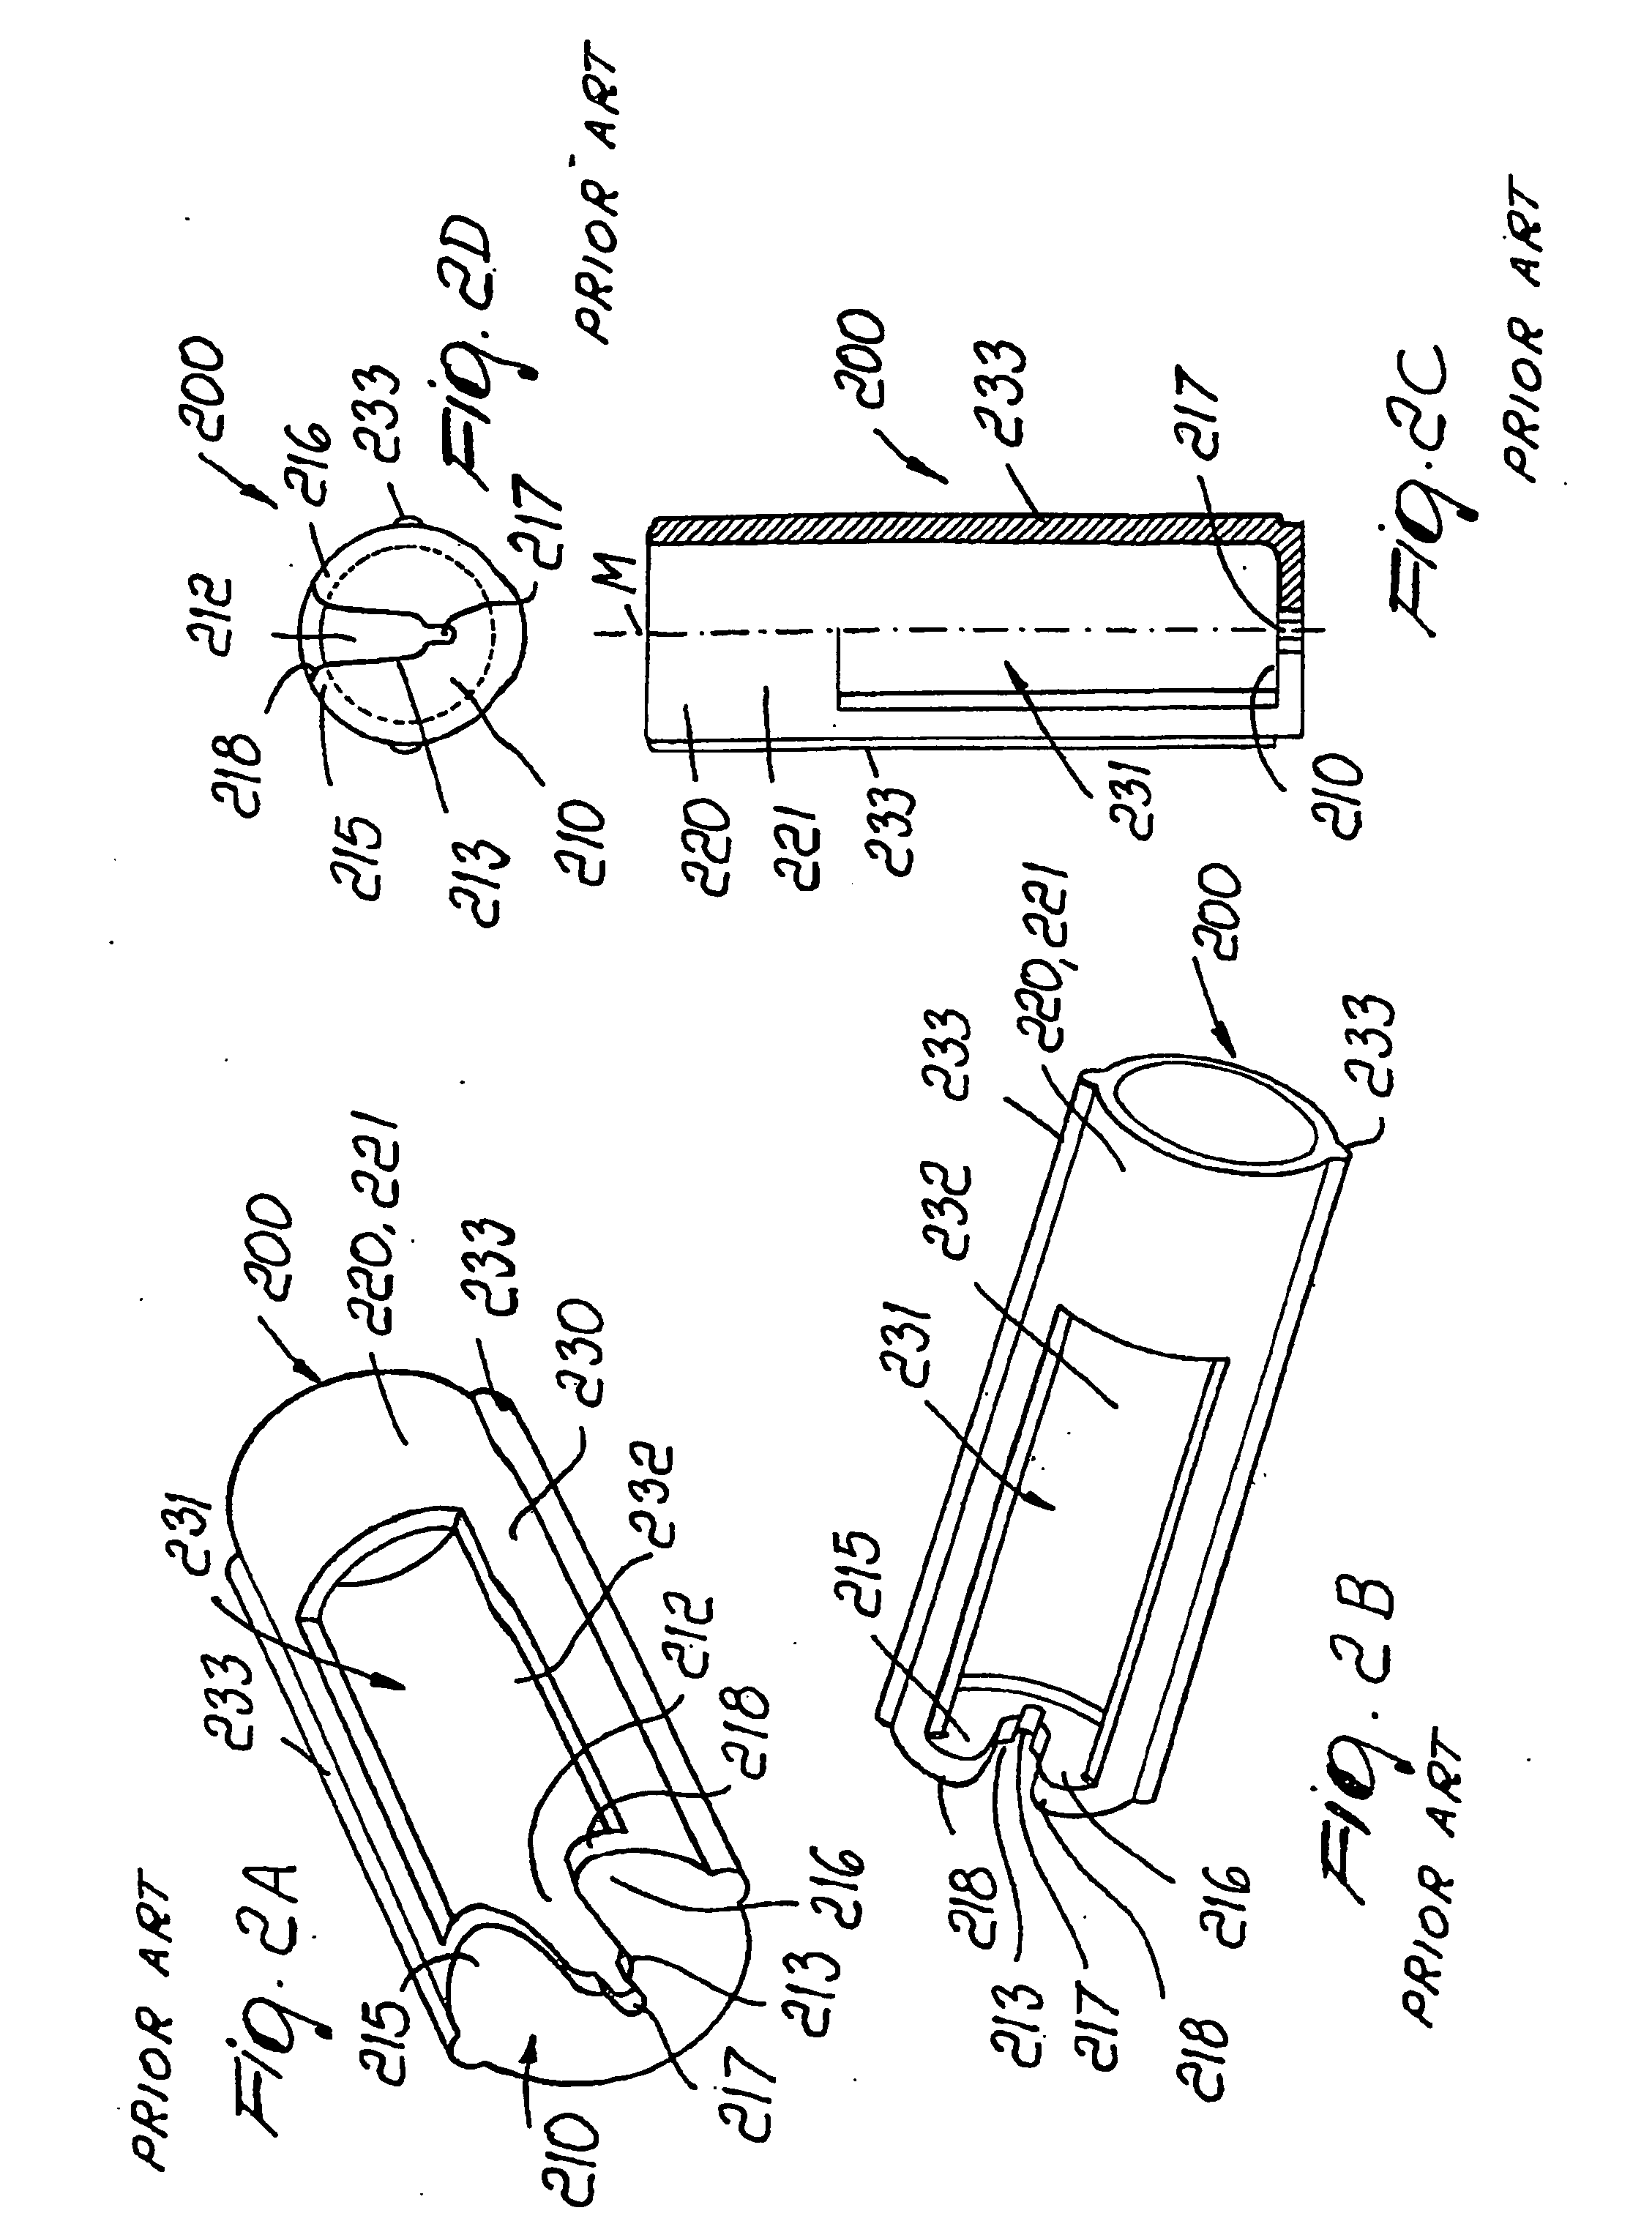 Package for preserving a medical device or the like